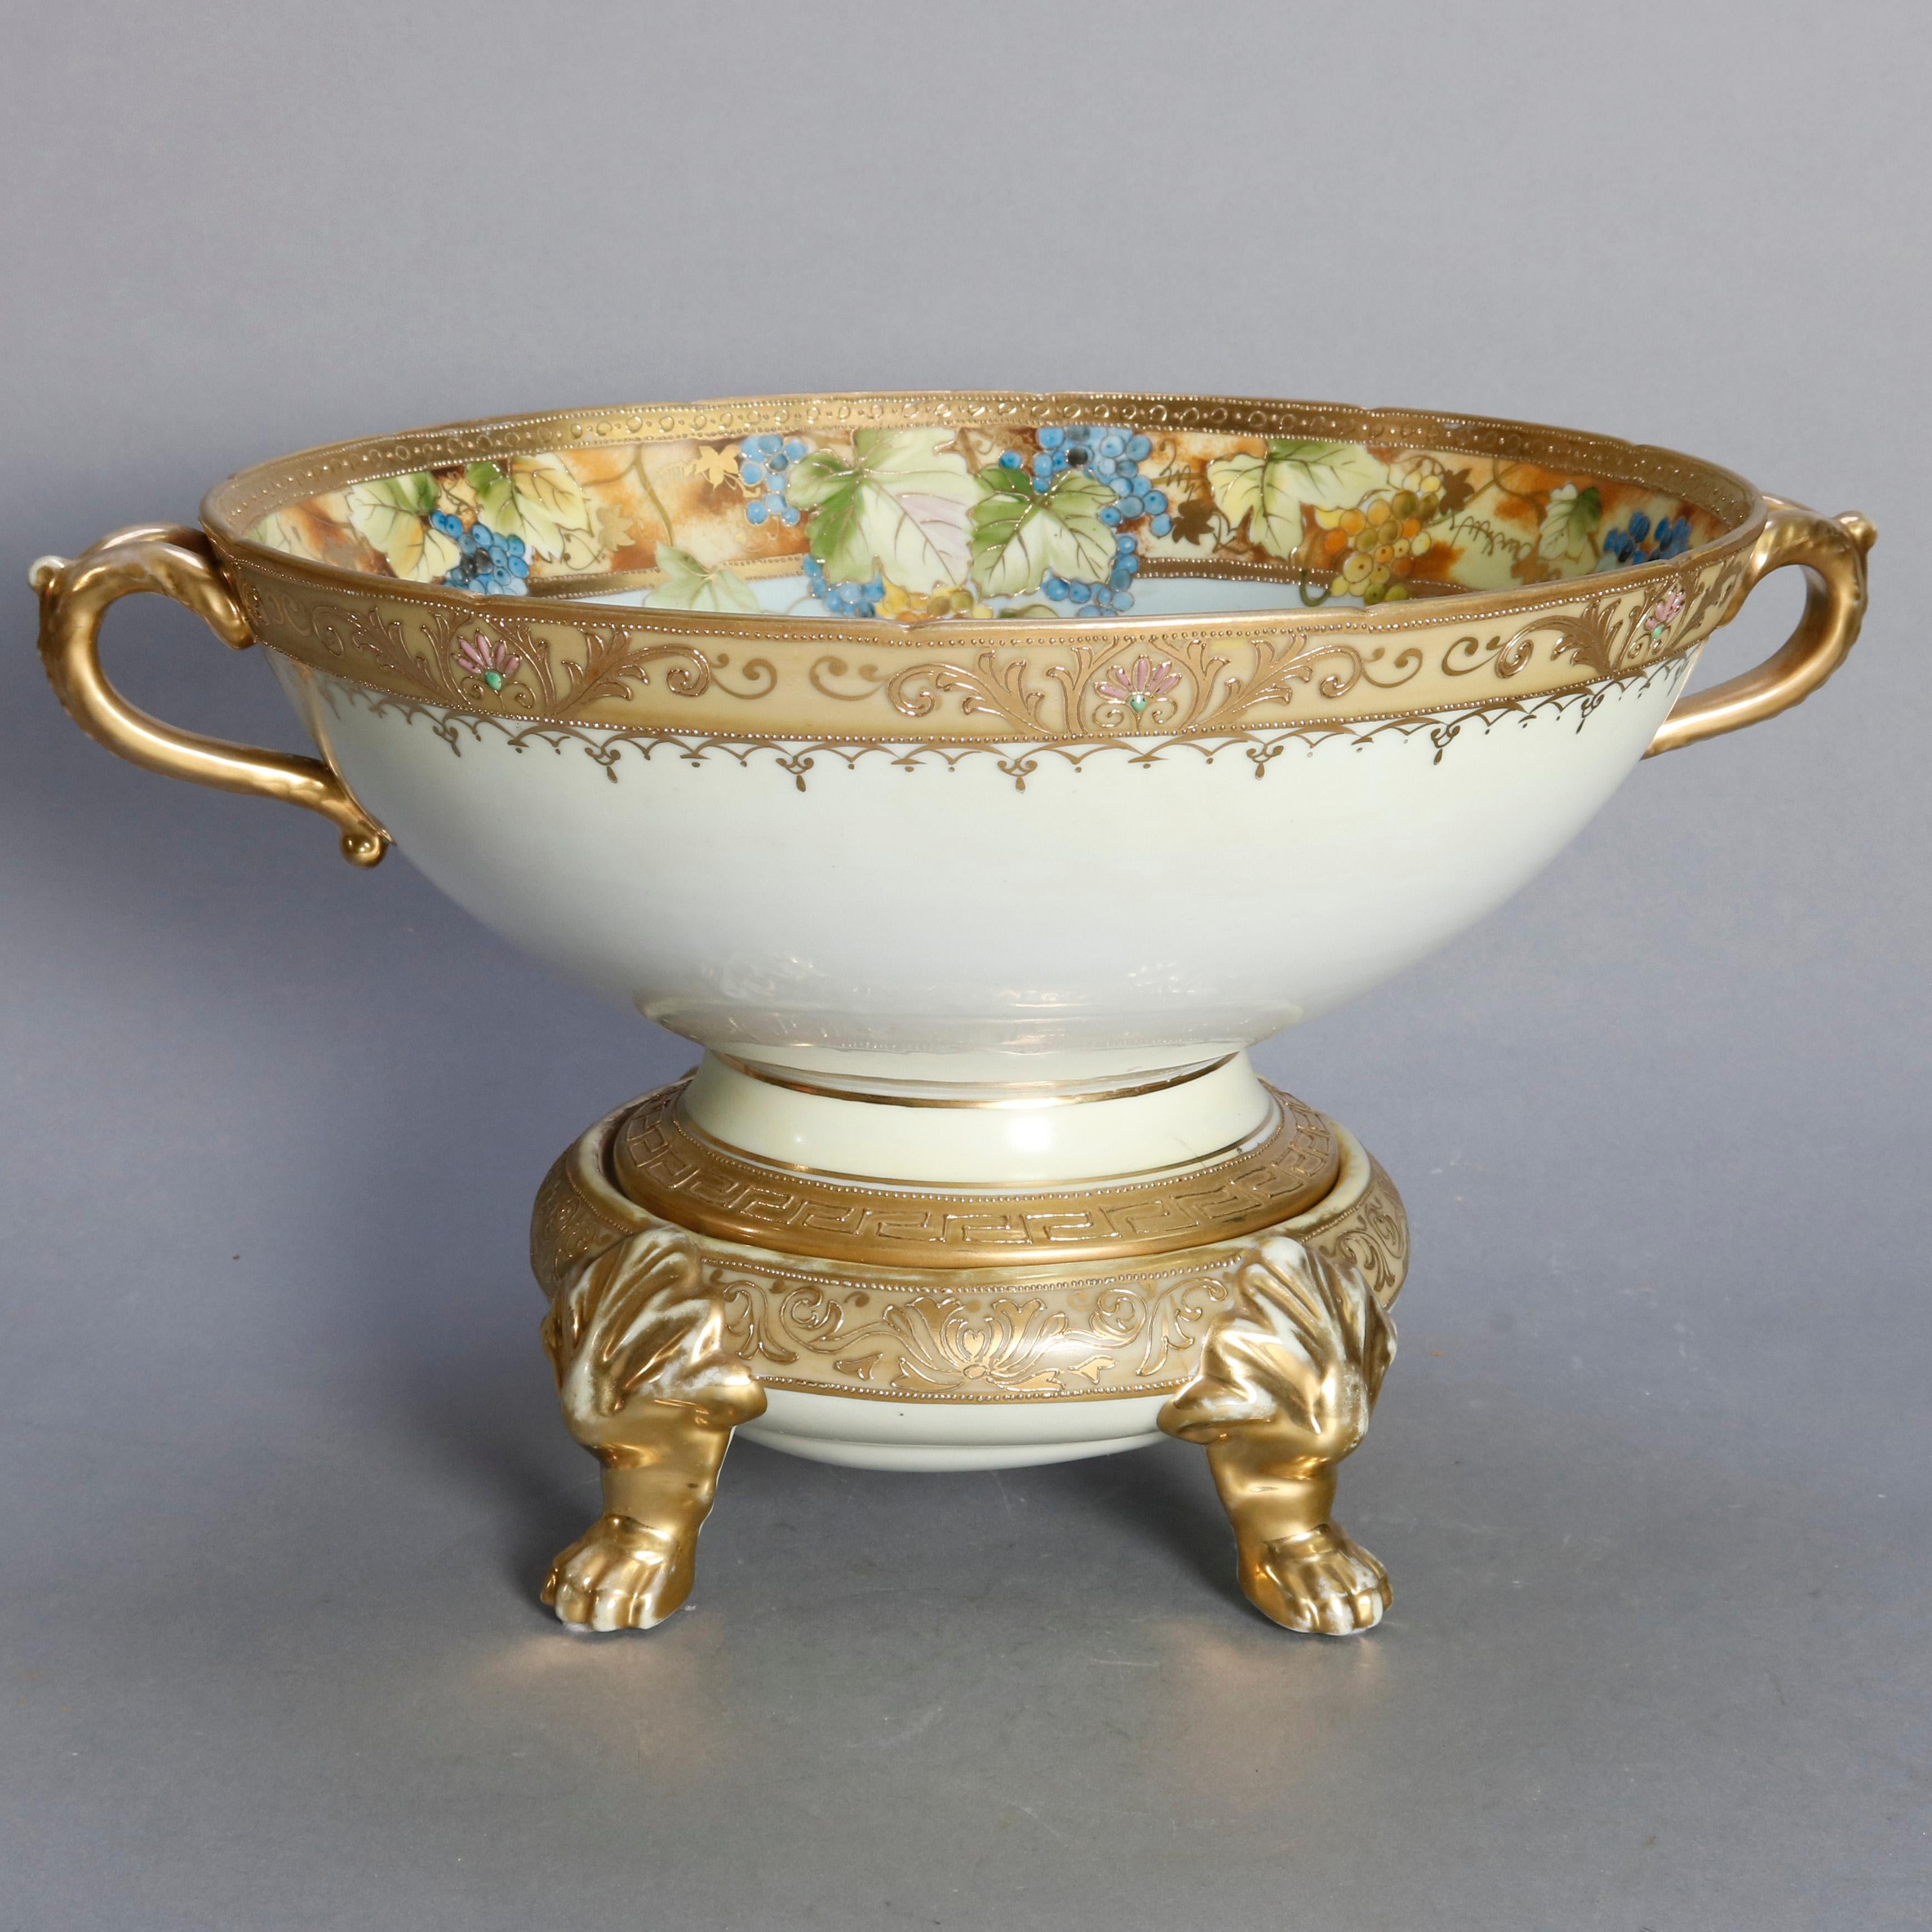 An antique Japanese Nippon porcelain punch bowl offers hand painted bowl with seascape scene with sailing vessels bordered with grape and vine decoration, flanked by gilt scroll form handles and seated on gilt decorated base with paw feet, green